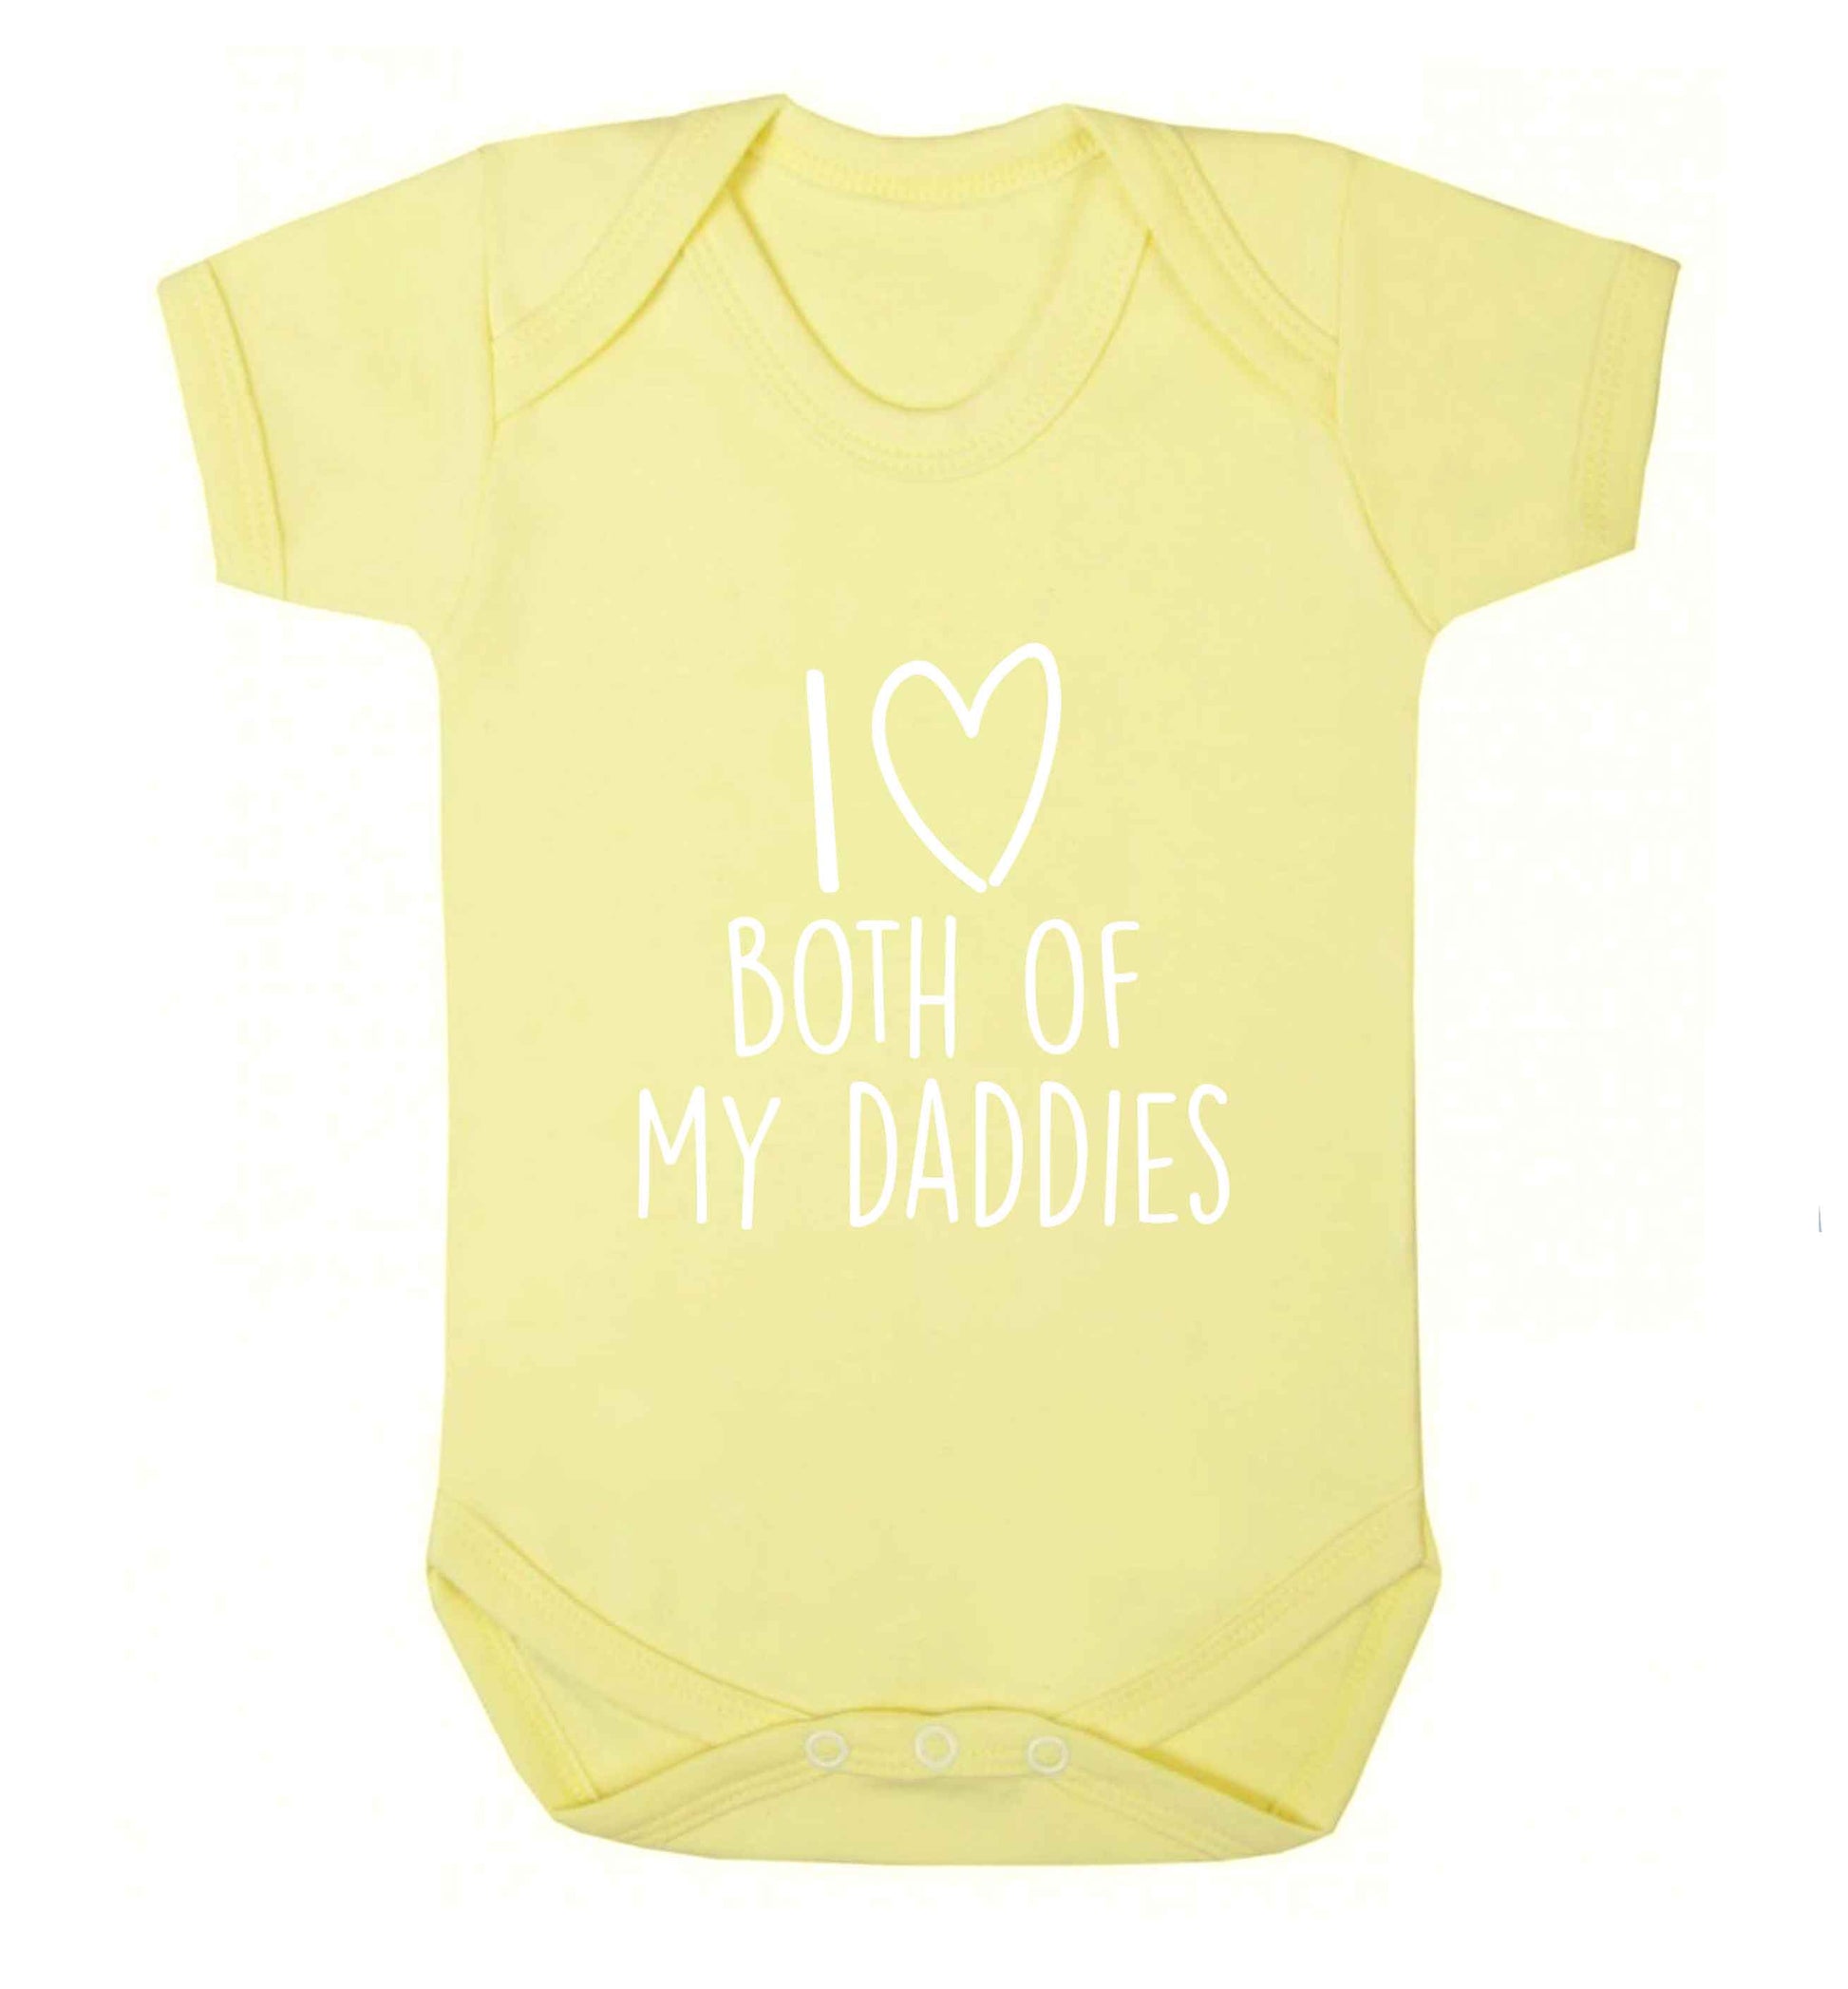 I love both of my daddies baby vest pale yellow 18-24 months